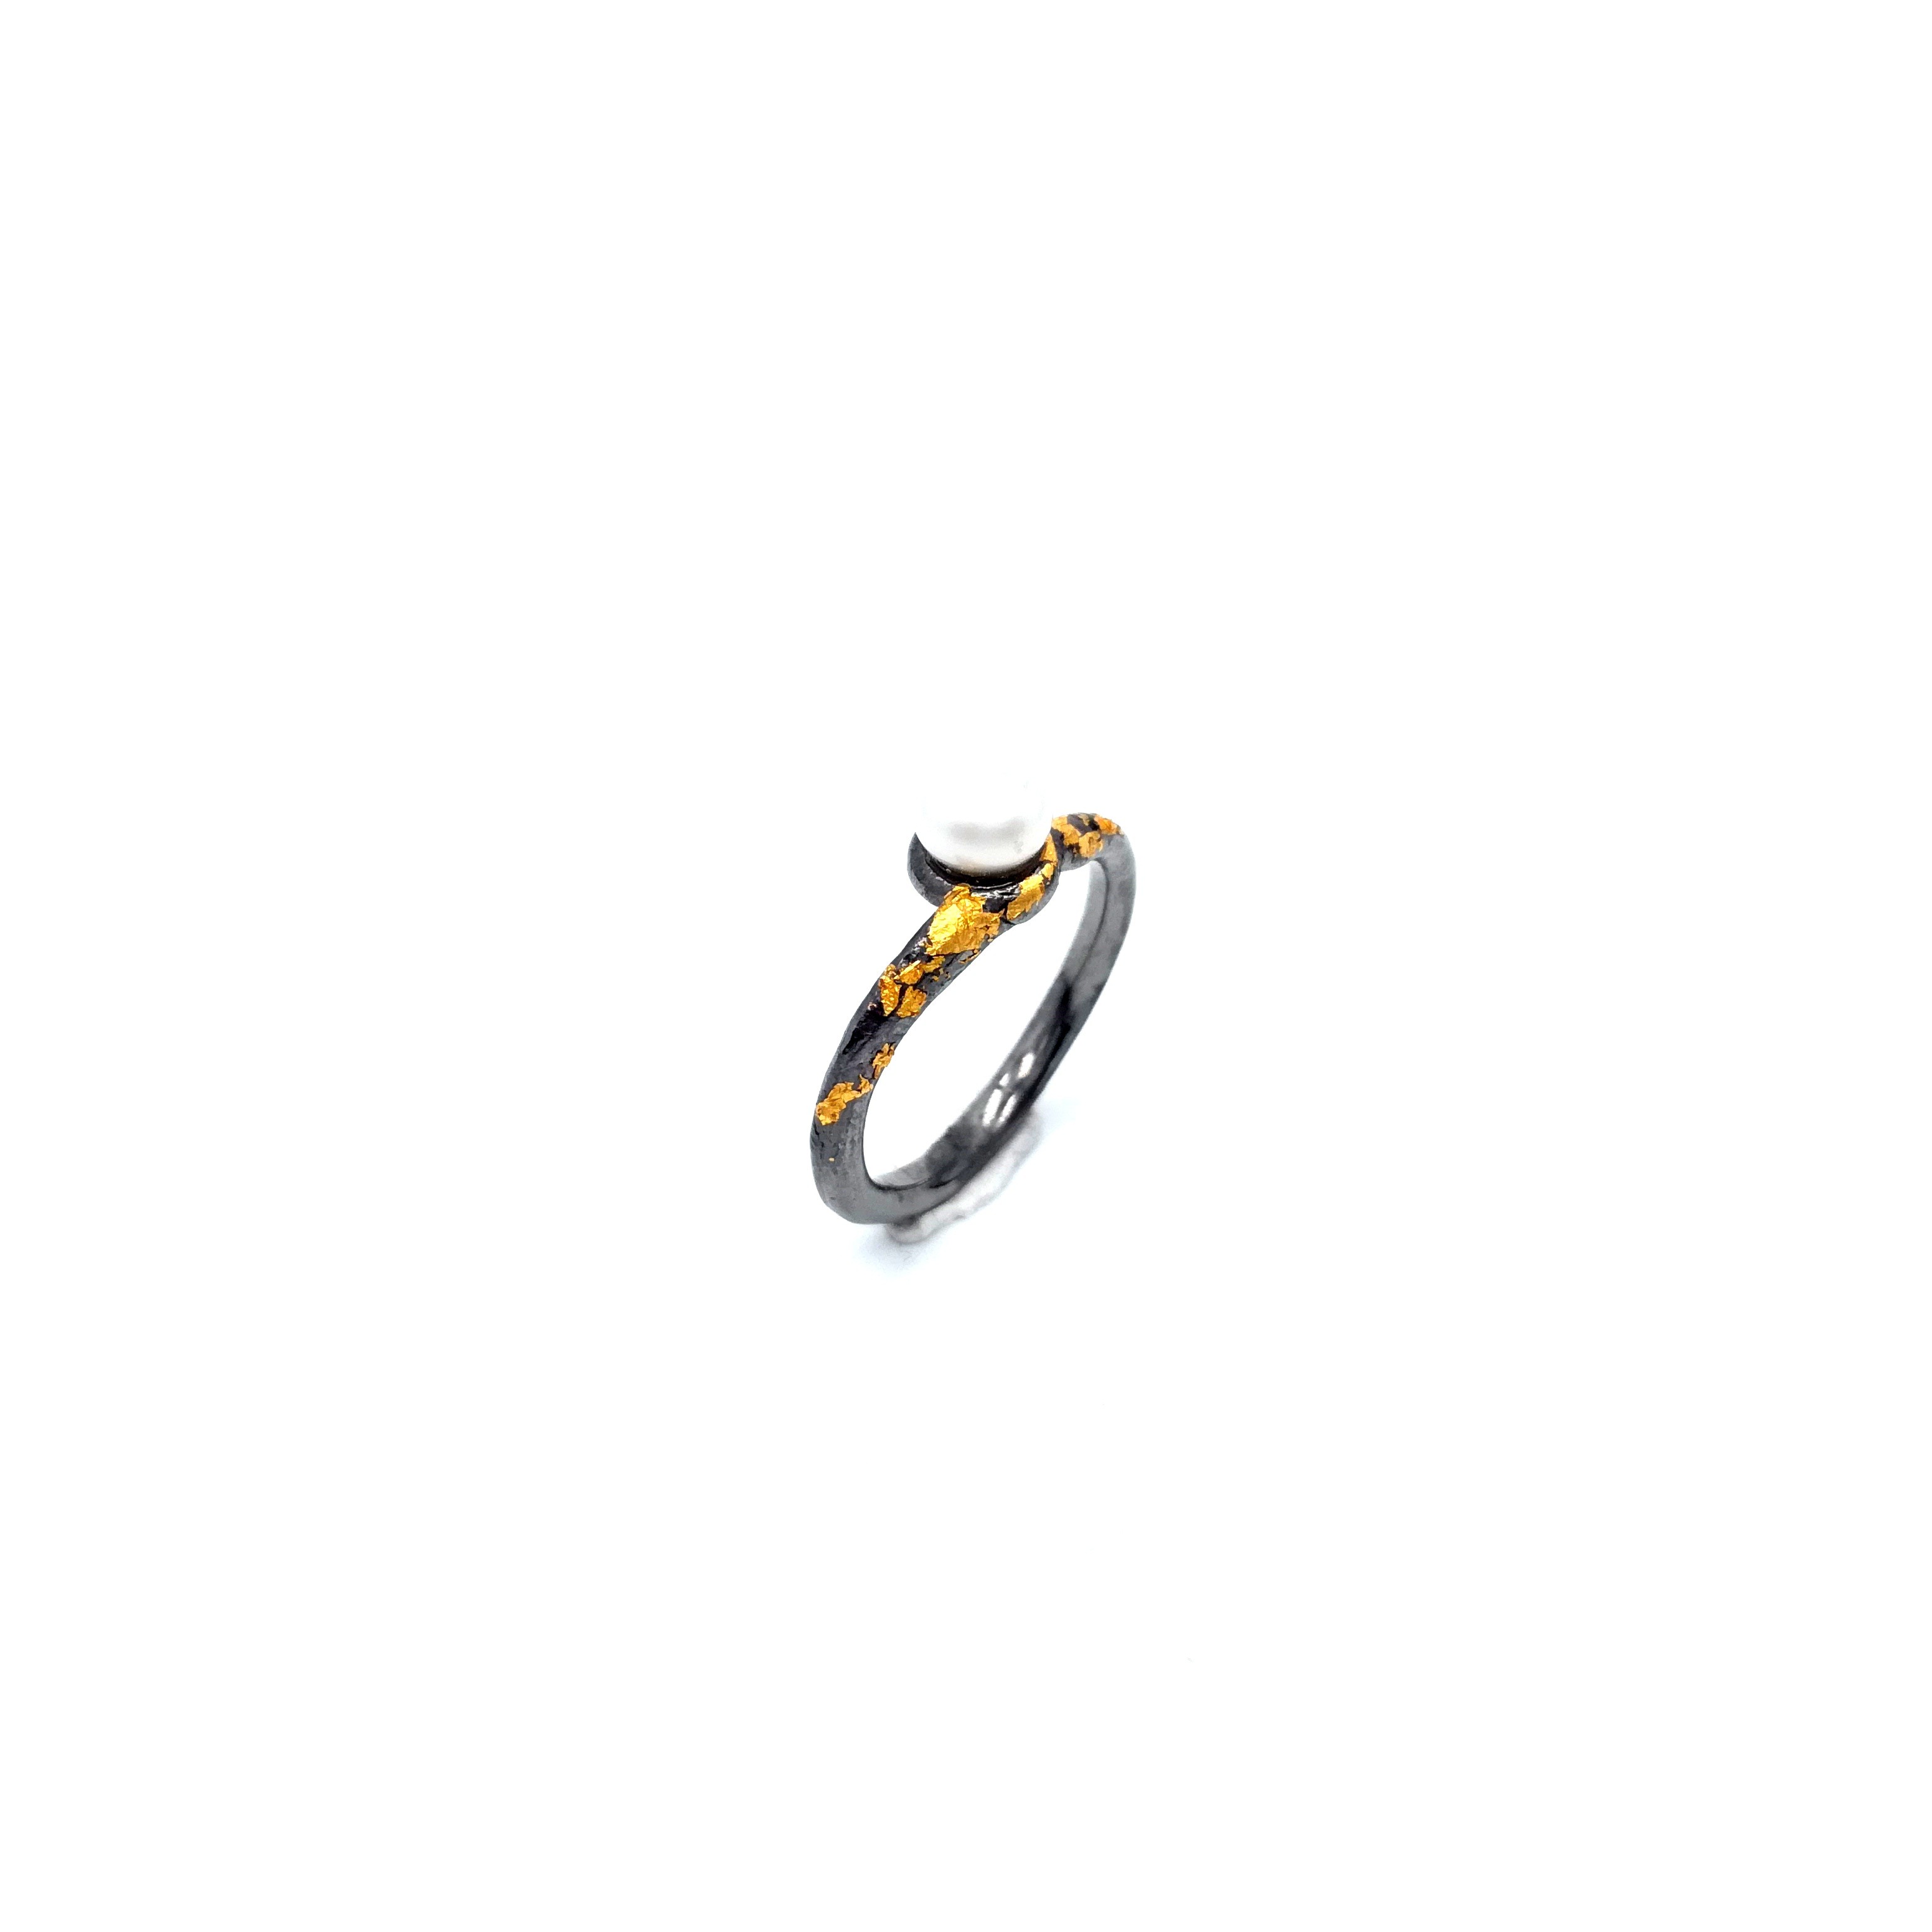 Silver ring 925 black rhodium plated with gold leaf 22K and pearl